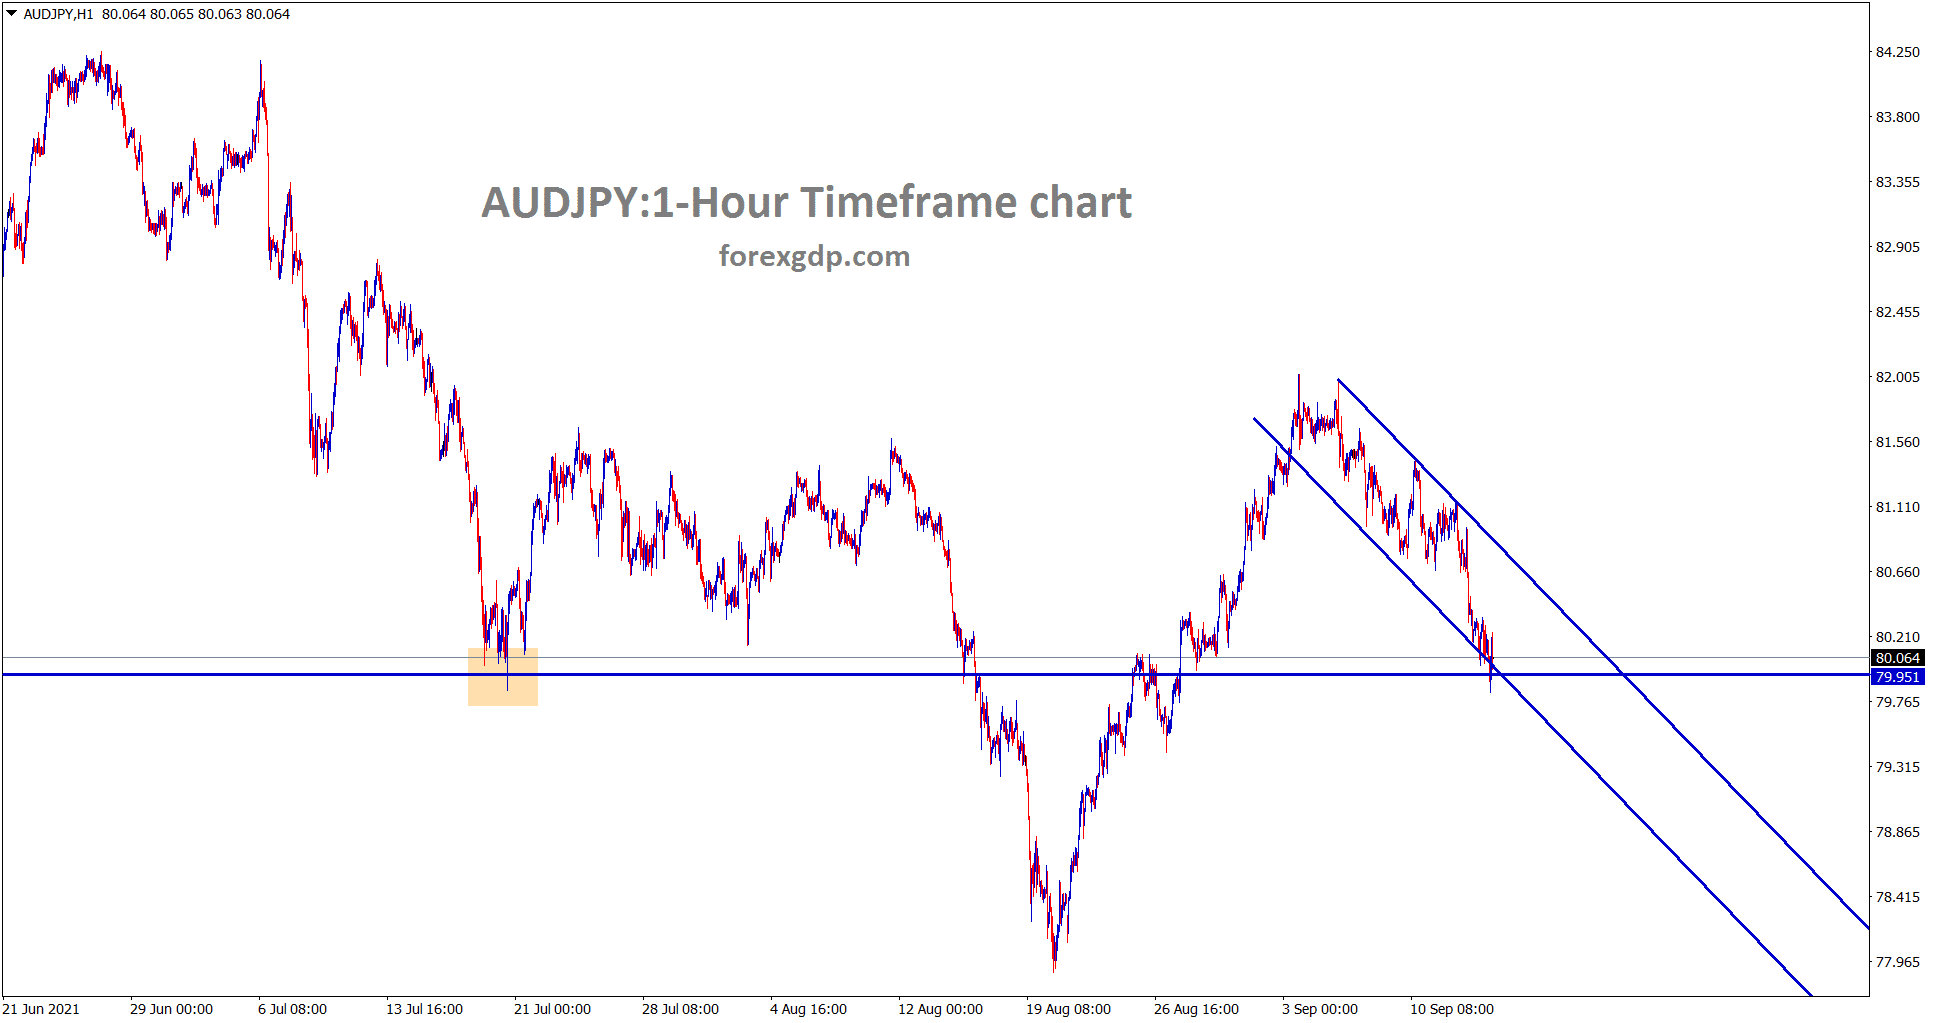 AUDJPY hits the minor support and the descending channel lower low level